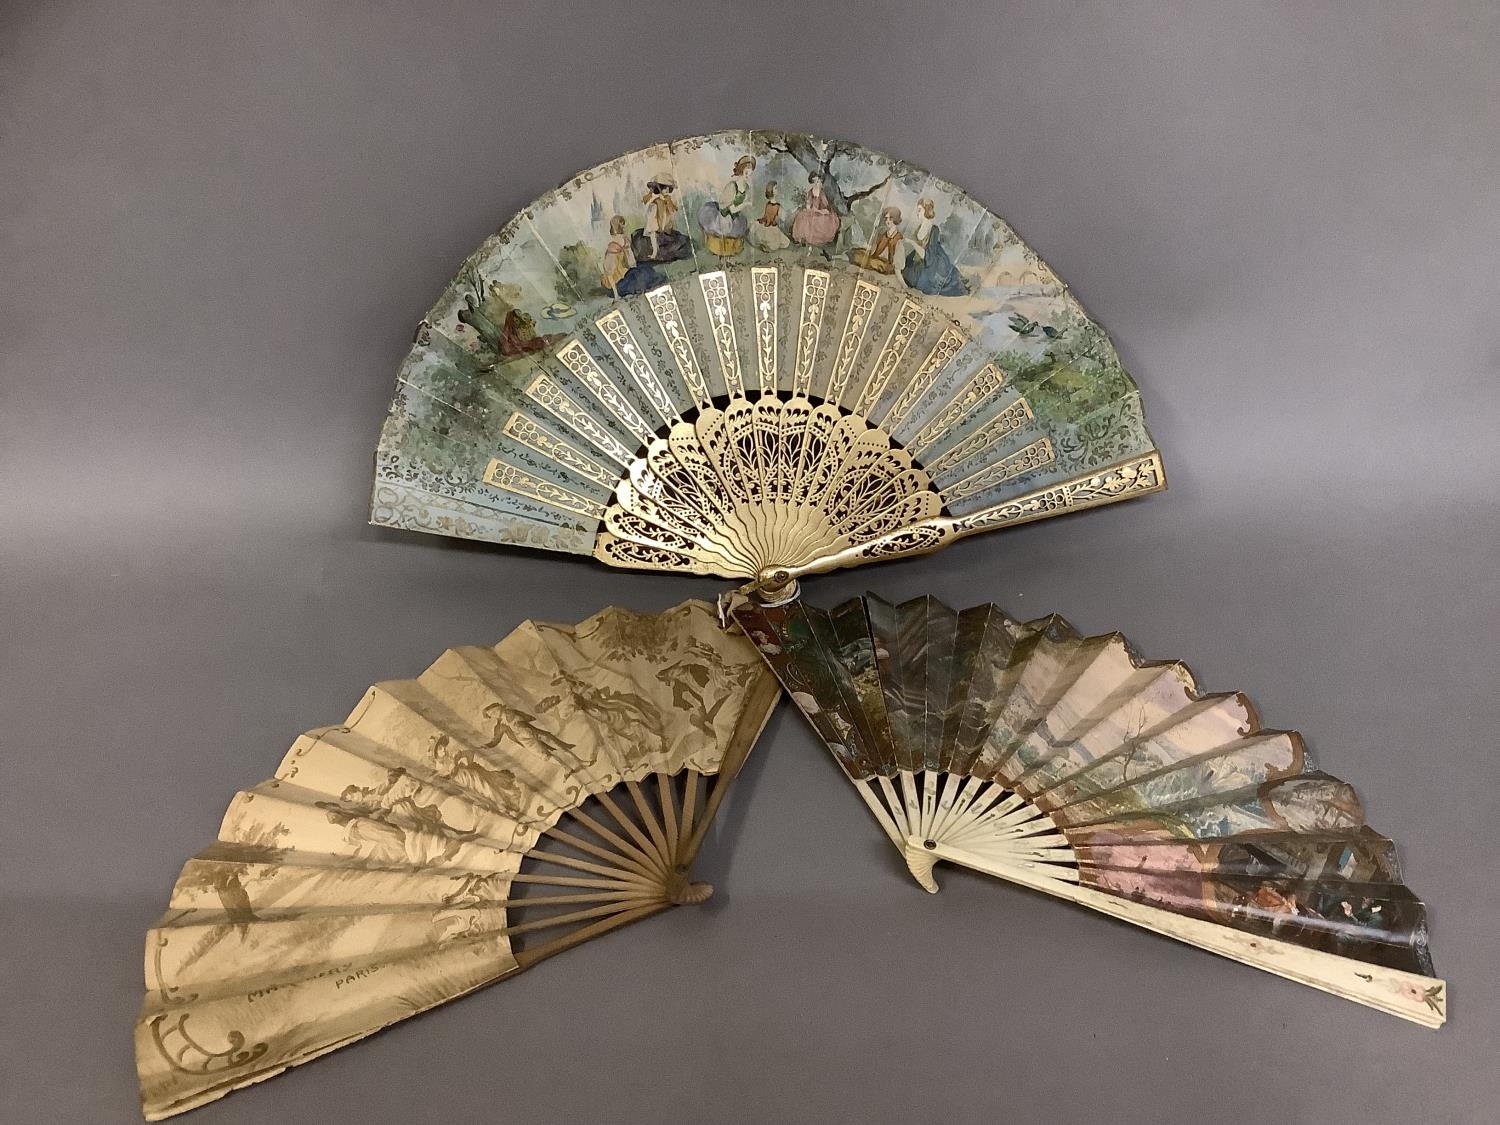 An early 20th century printed advertising fan for The Ritz, marked Eventails Duvelleroy, Paris,